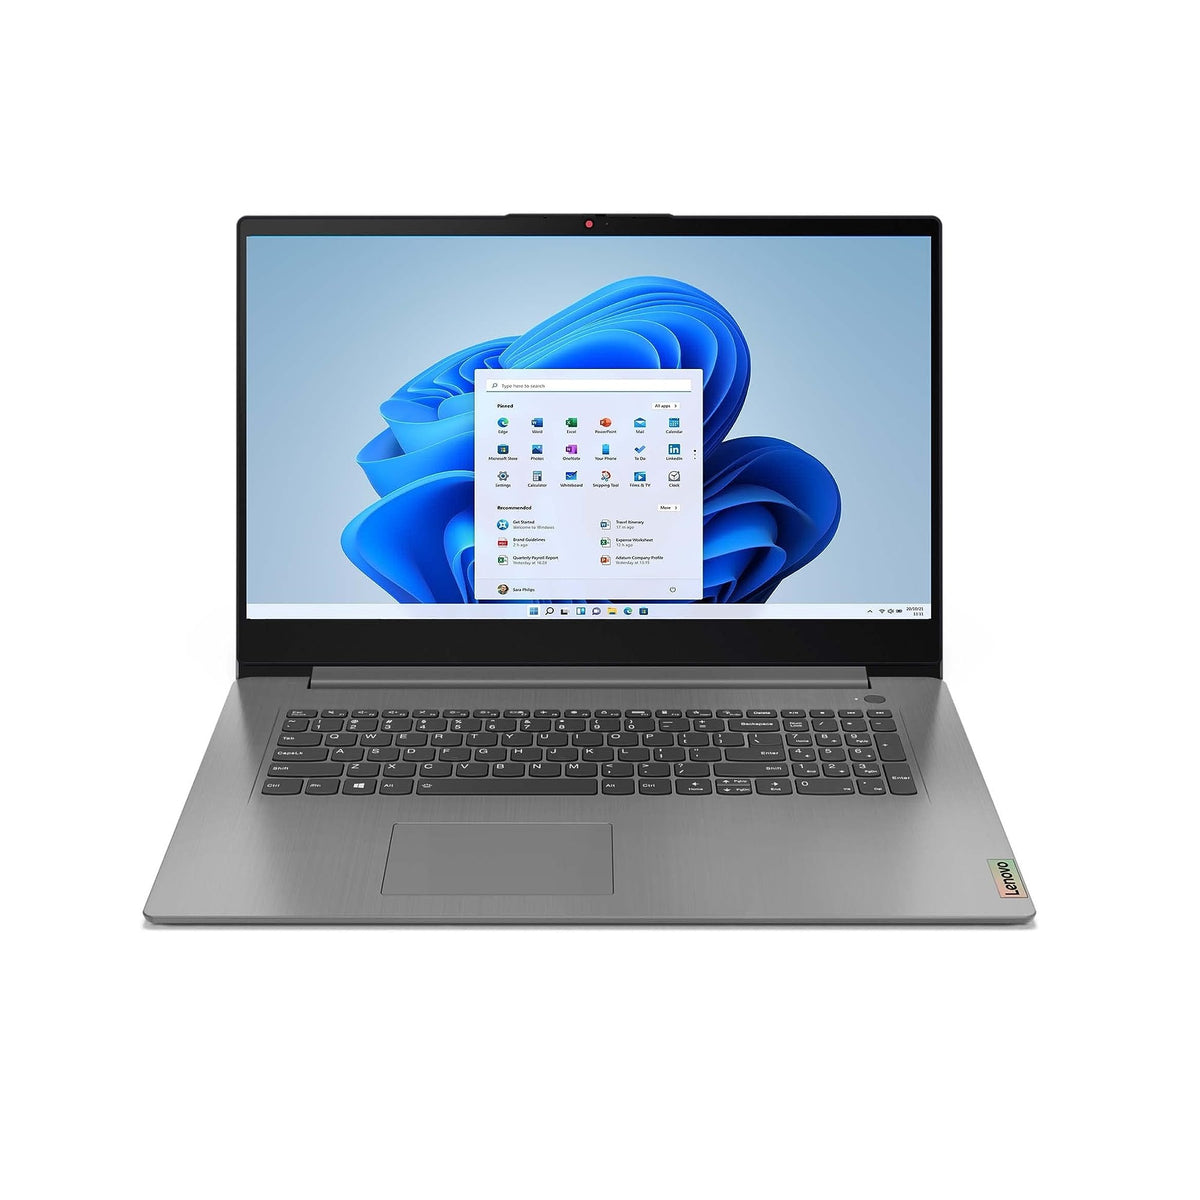 Lenovo IdeaPad 3 15&quot; Intel Core i7 8GB/1TB SSD Laptop - Artic Grey | 82H802RGUK from Lenovo - DID Electrical